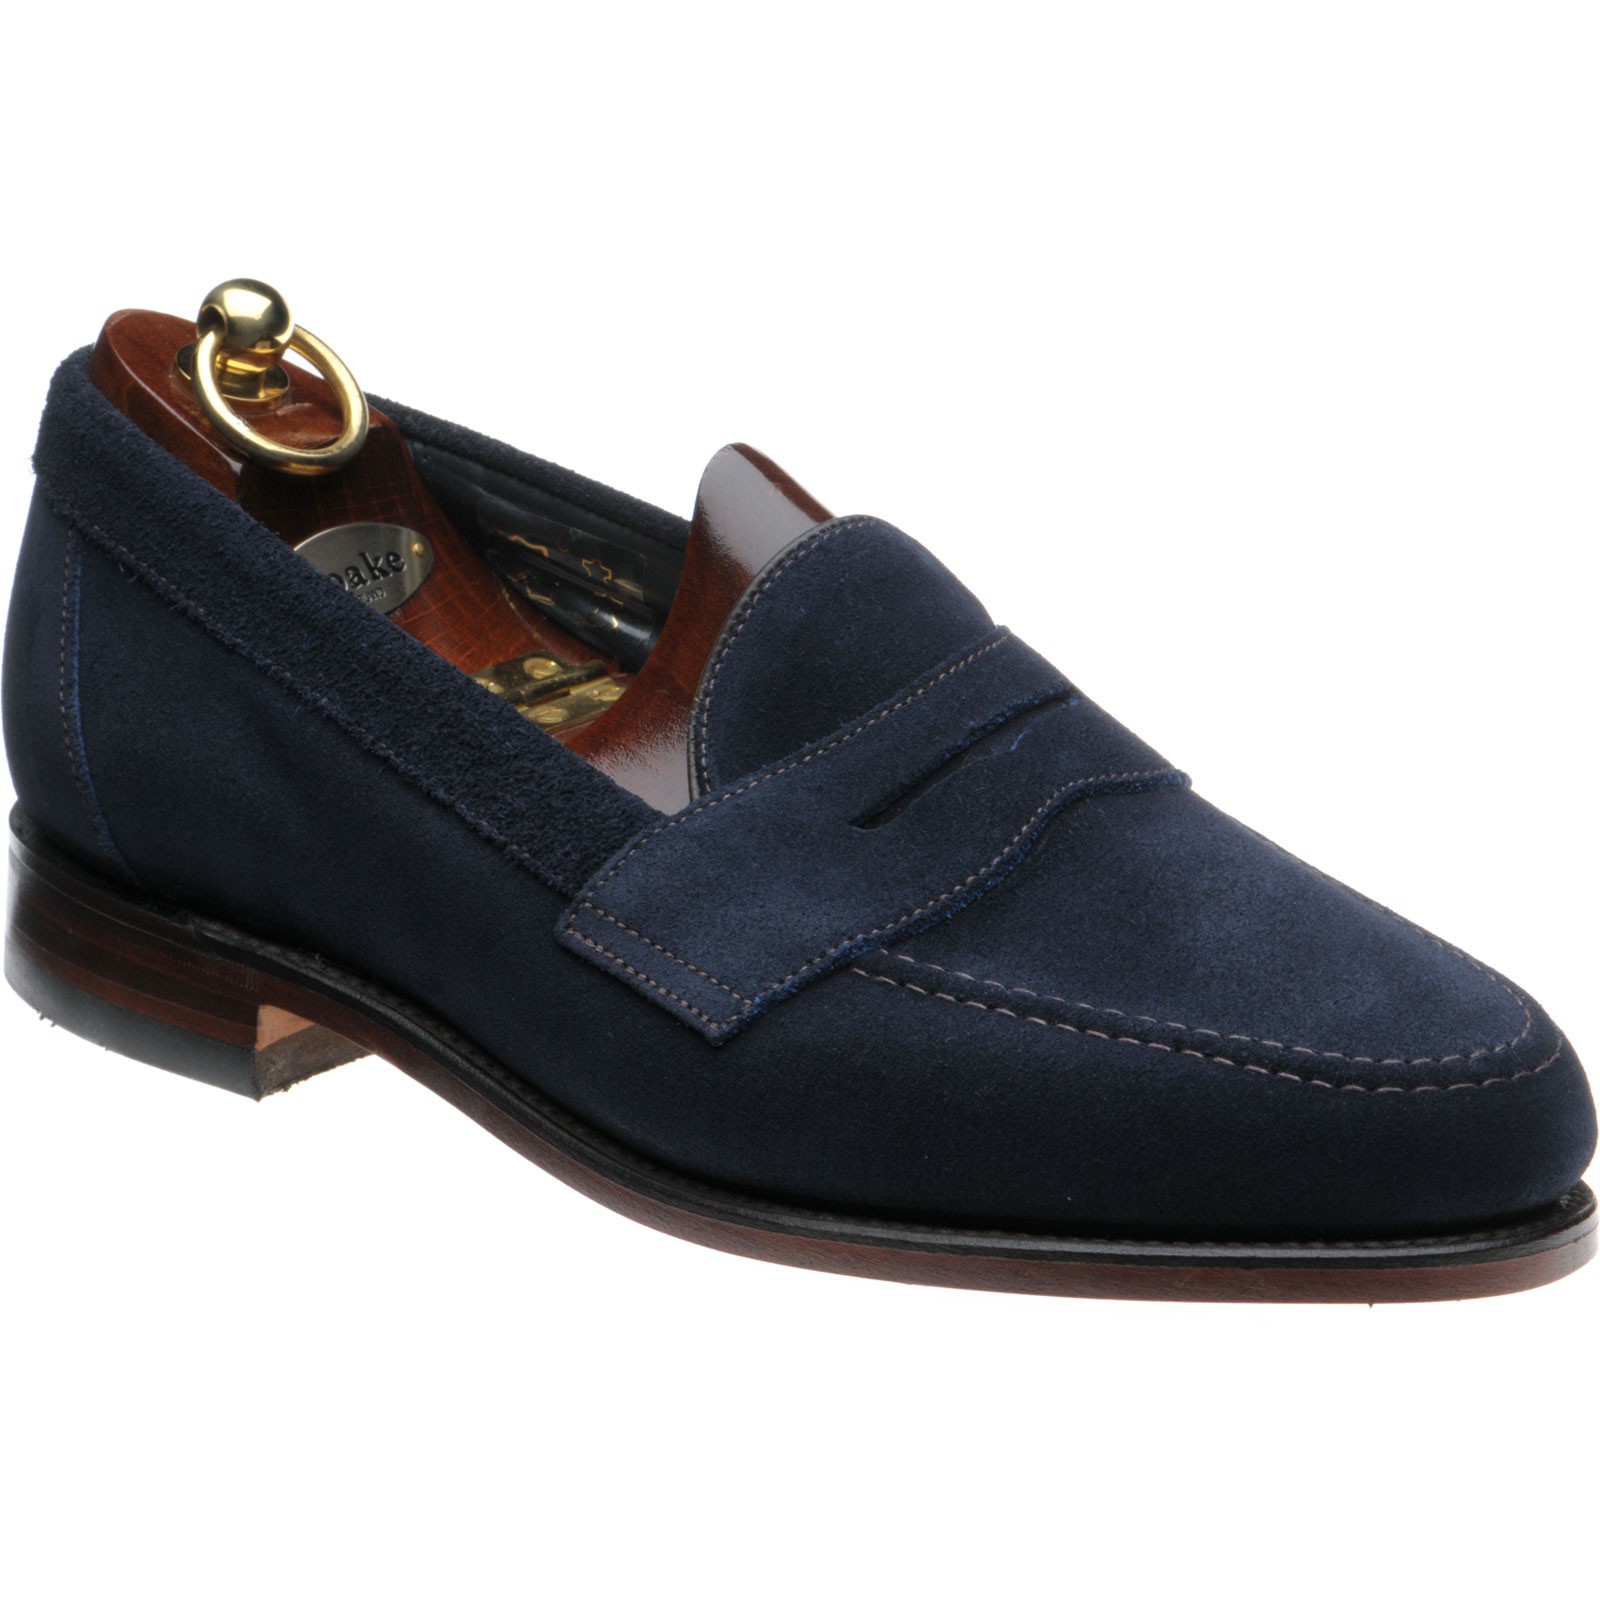 Loake shoes | Loake Sale | Eton loafers in Navy Suede at Herring Shoes